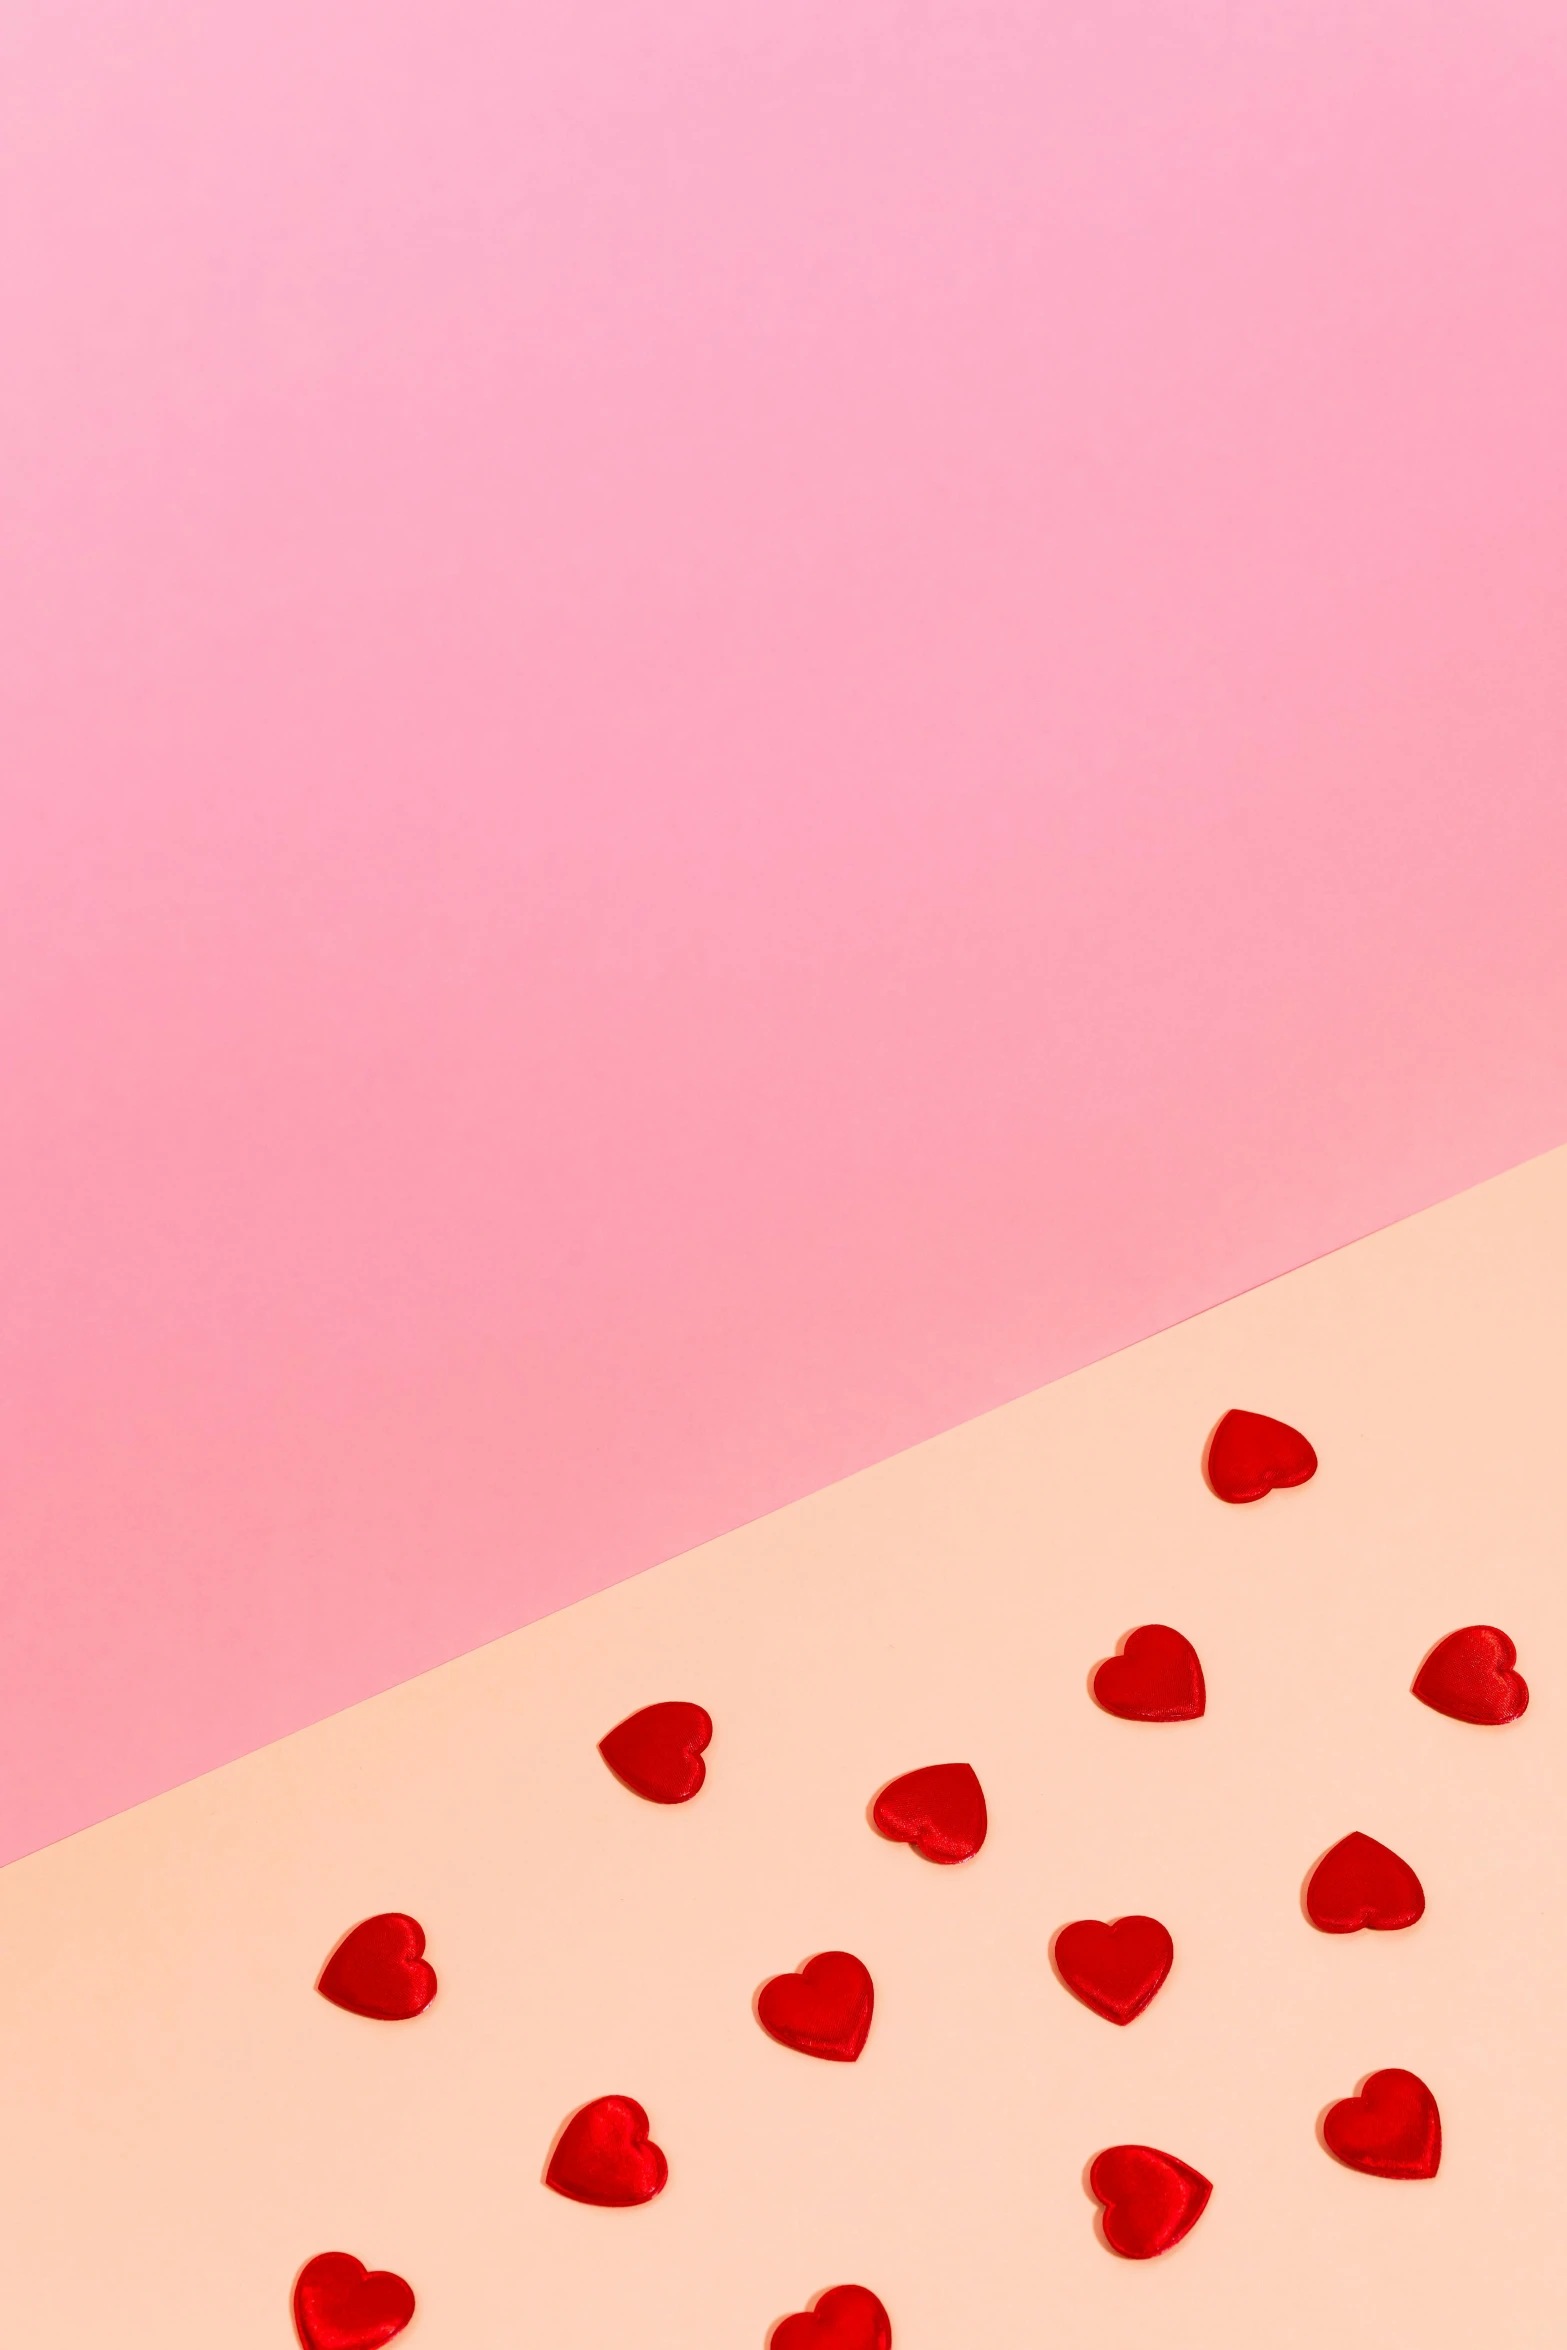 a couple of cupcakes sitting on top of a table, an album cover, by Julia Pishtar, trending on unsplash, visual art, hearts, made of candy, material design, detail shot